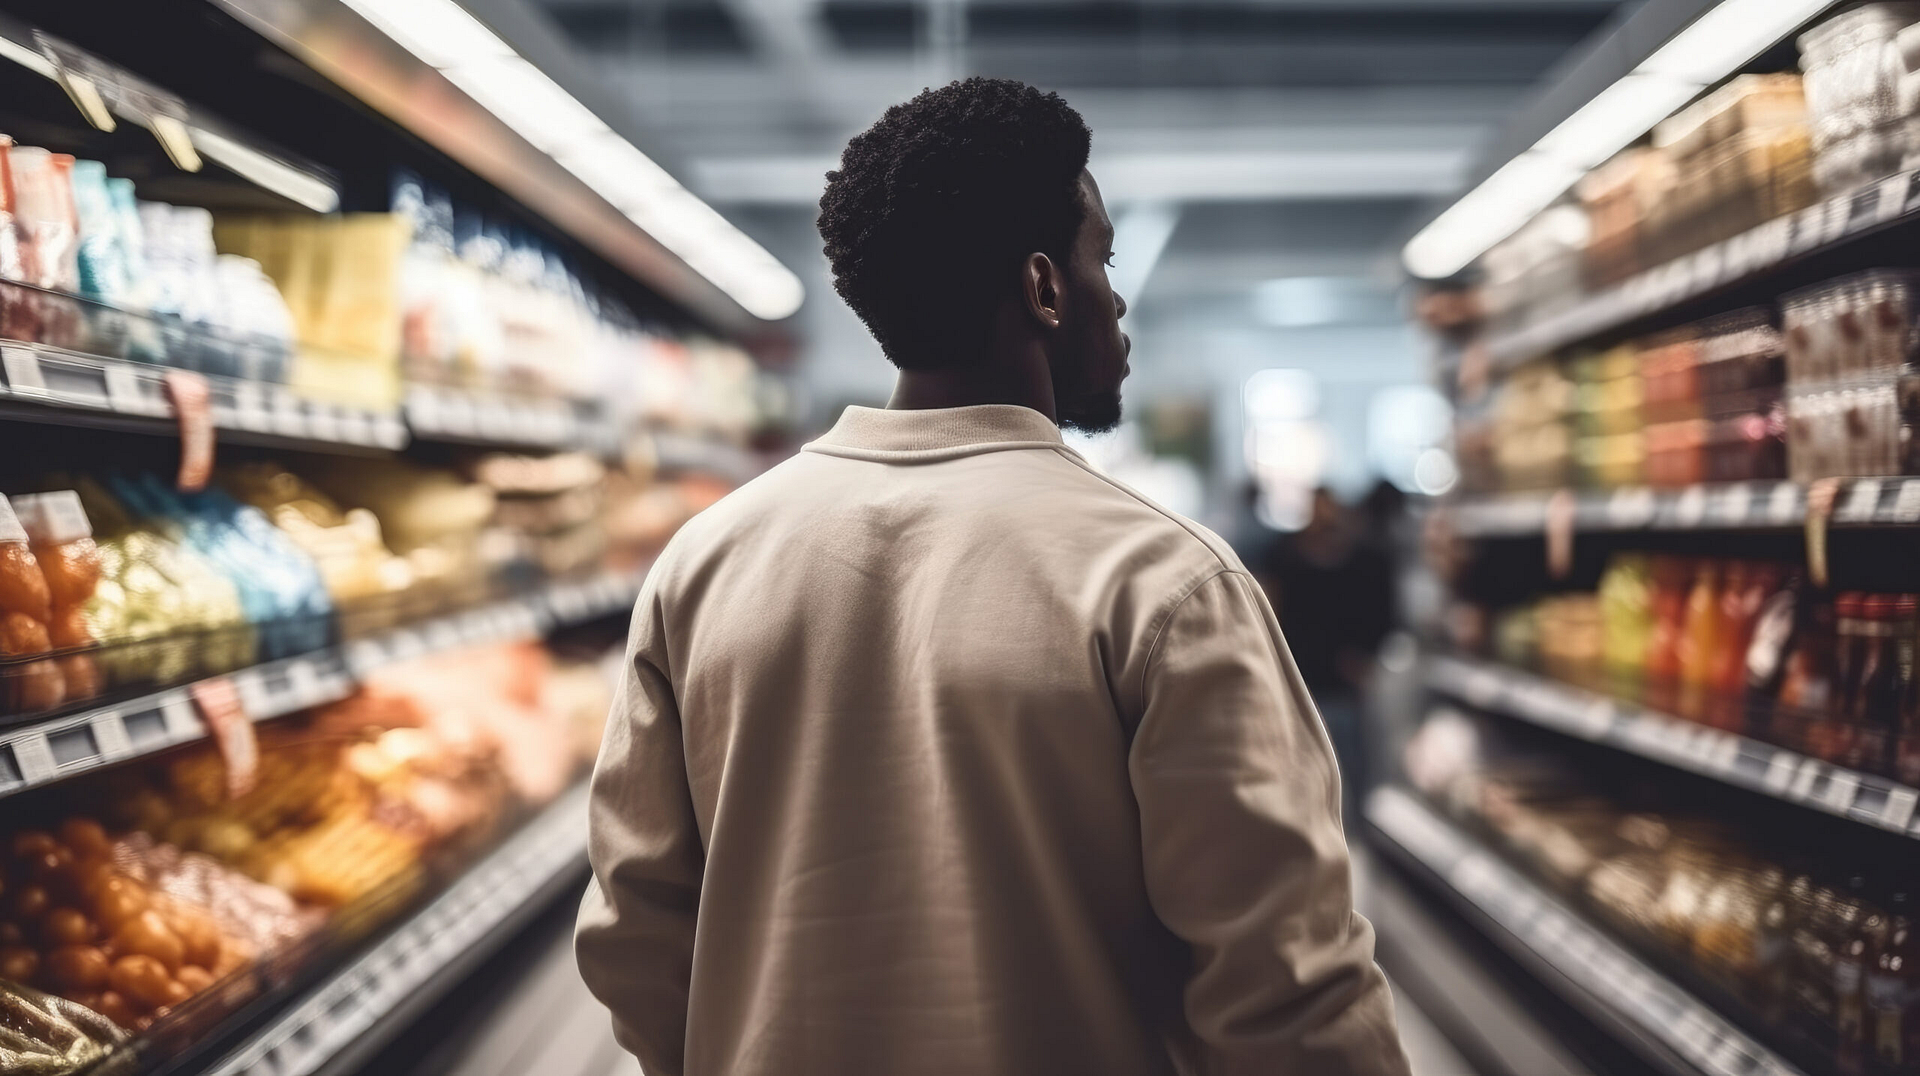 Young black man shopping in supermarket, Buying groceries and food products.